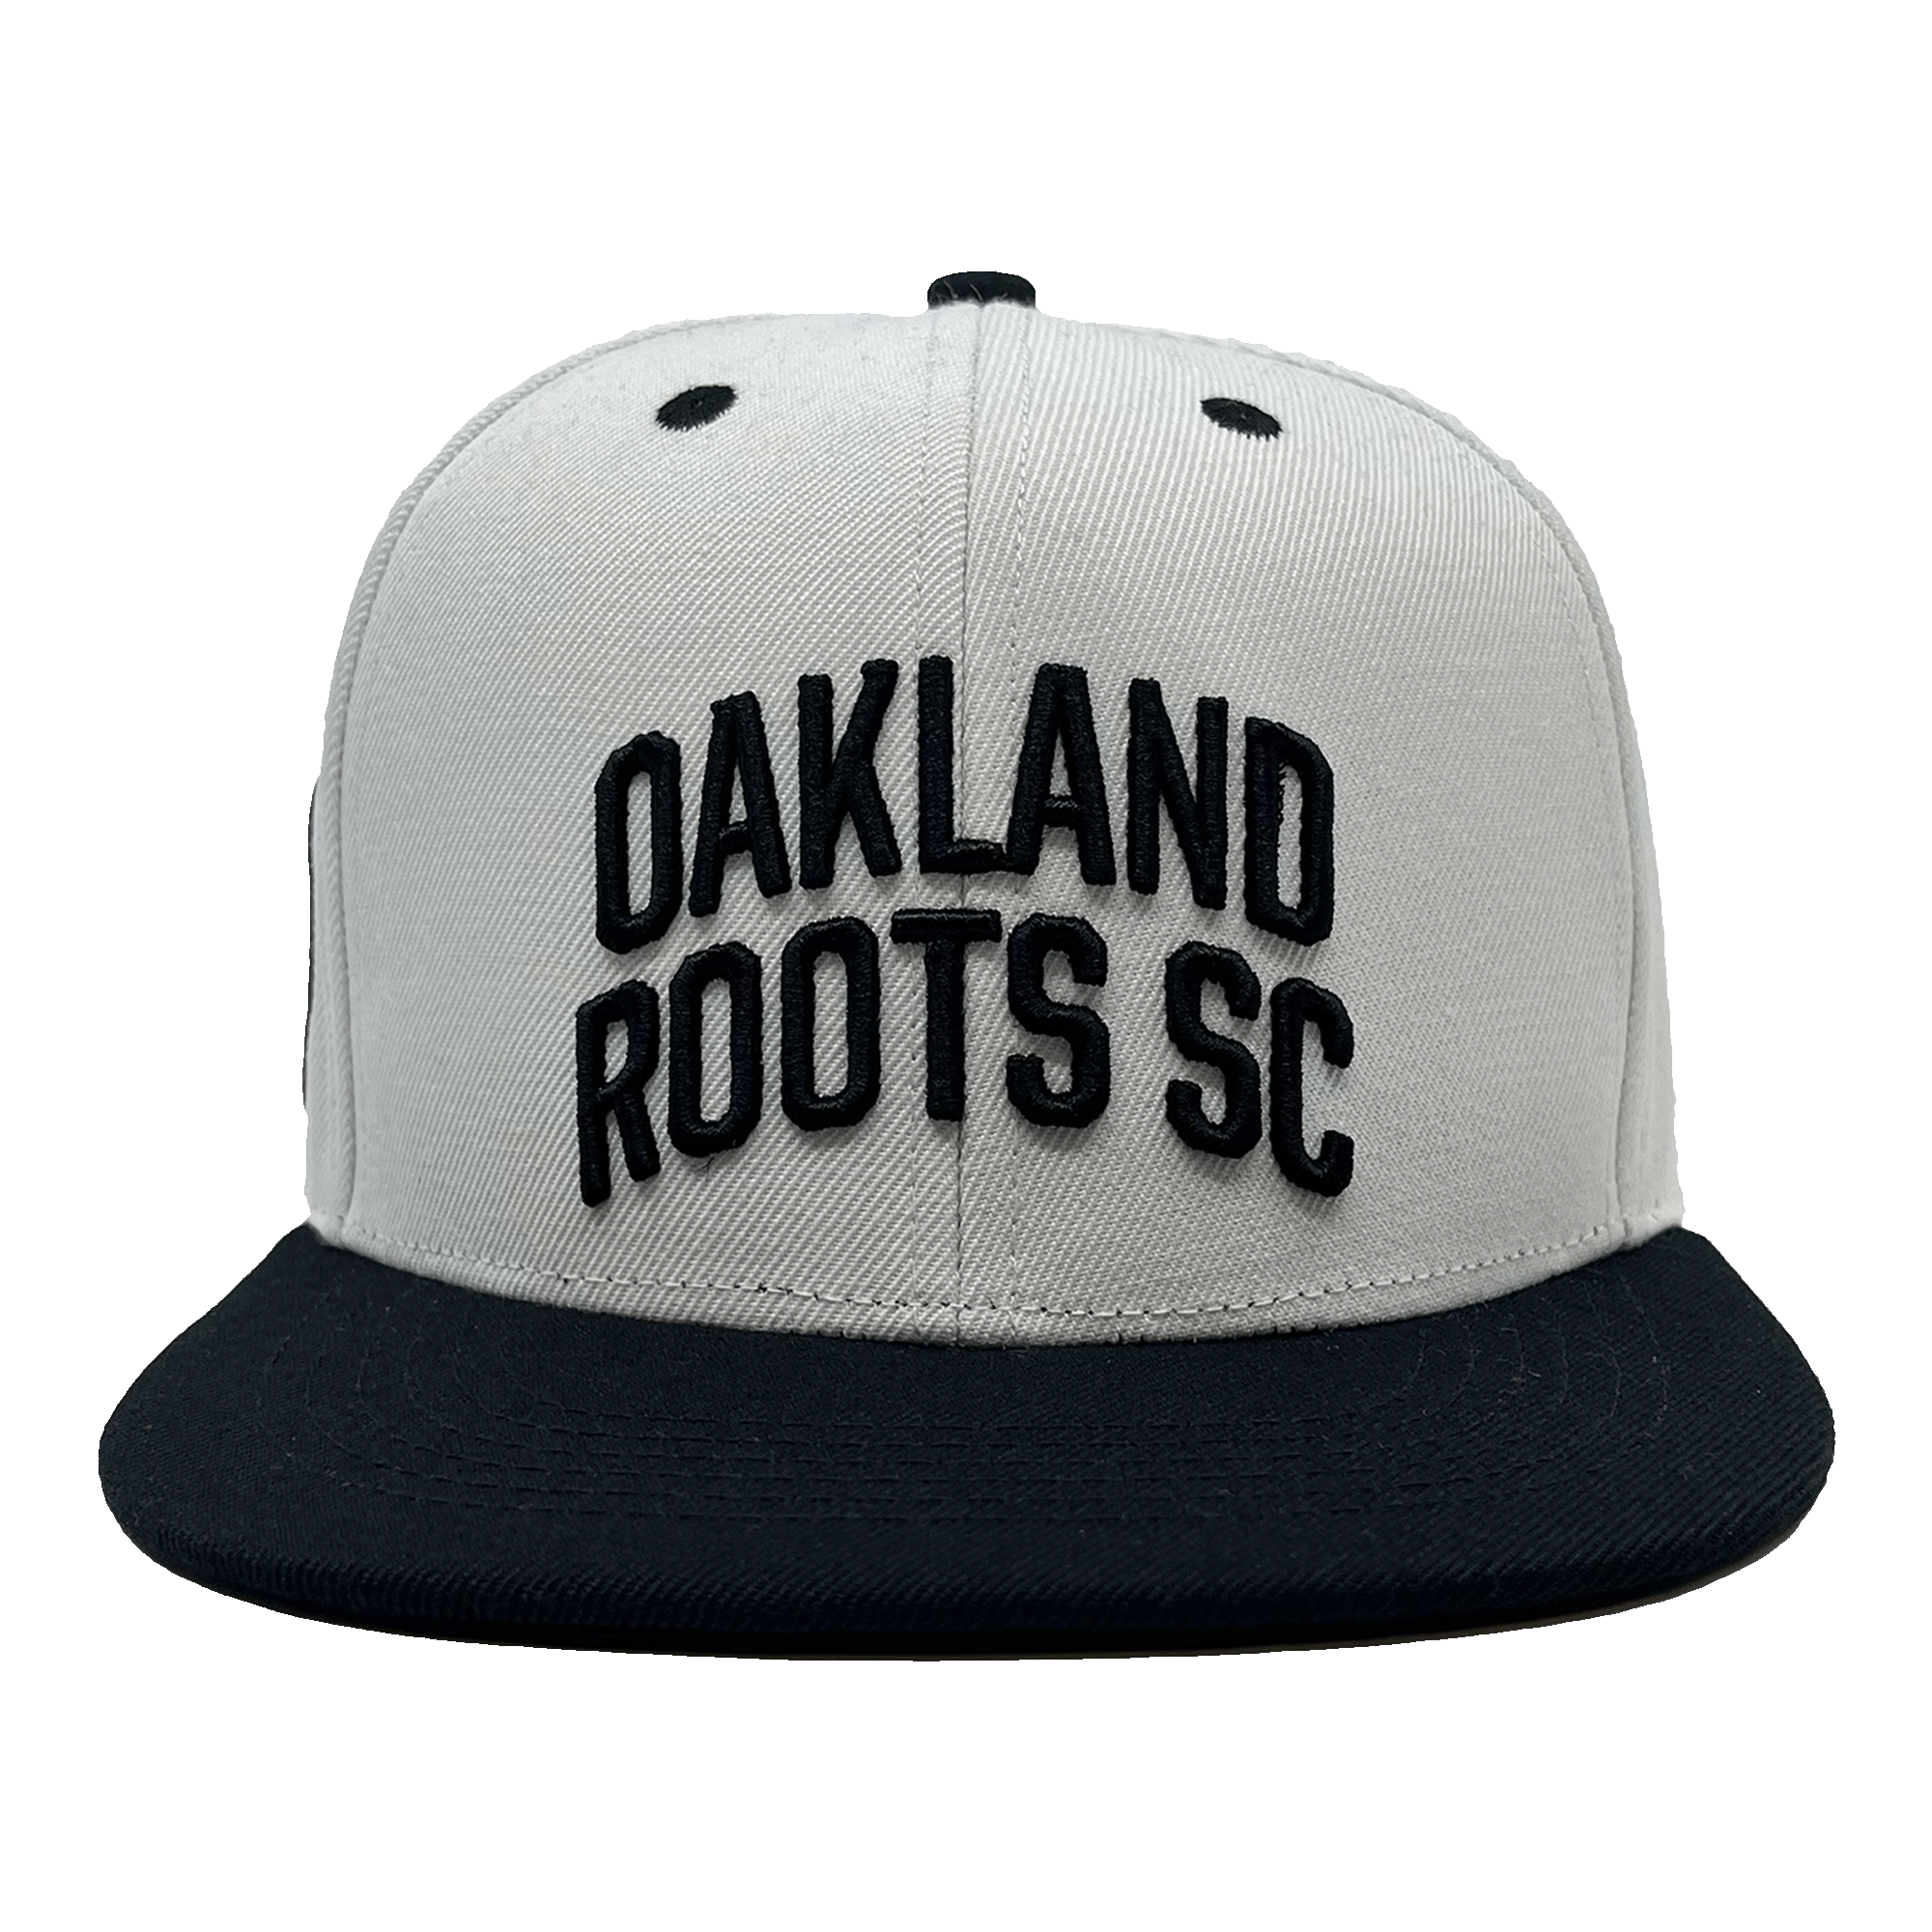 Front view of white snapback hat with black embroidered Oakland Roots SC wordmark on the crown, black flat square bill and black embroidered details.